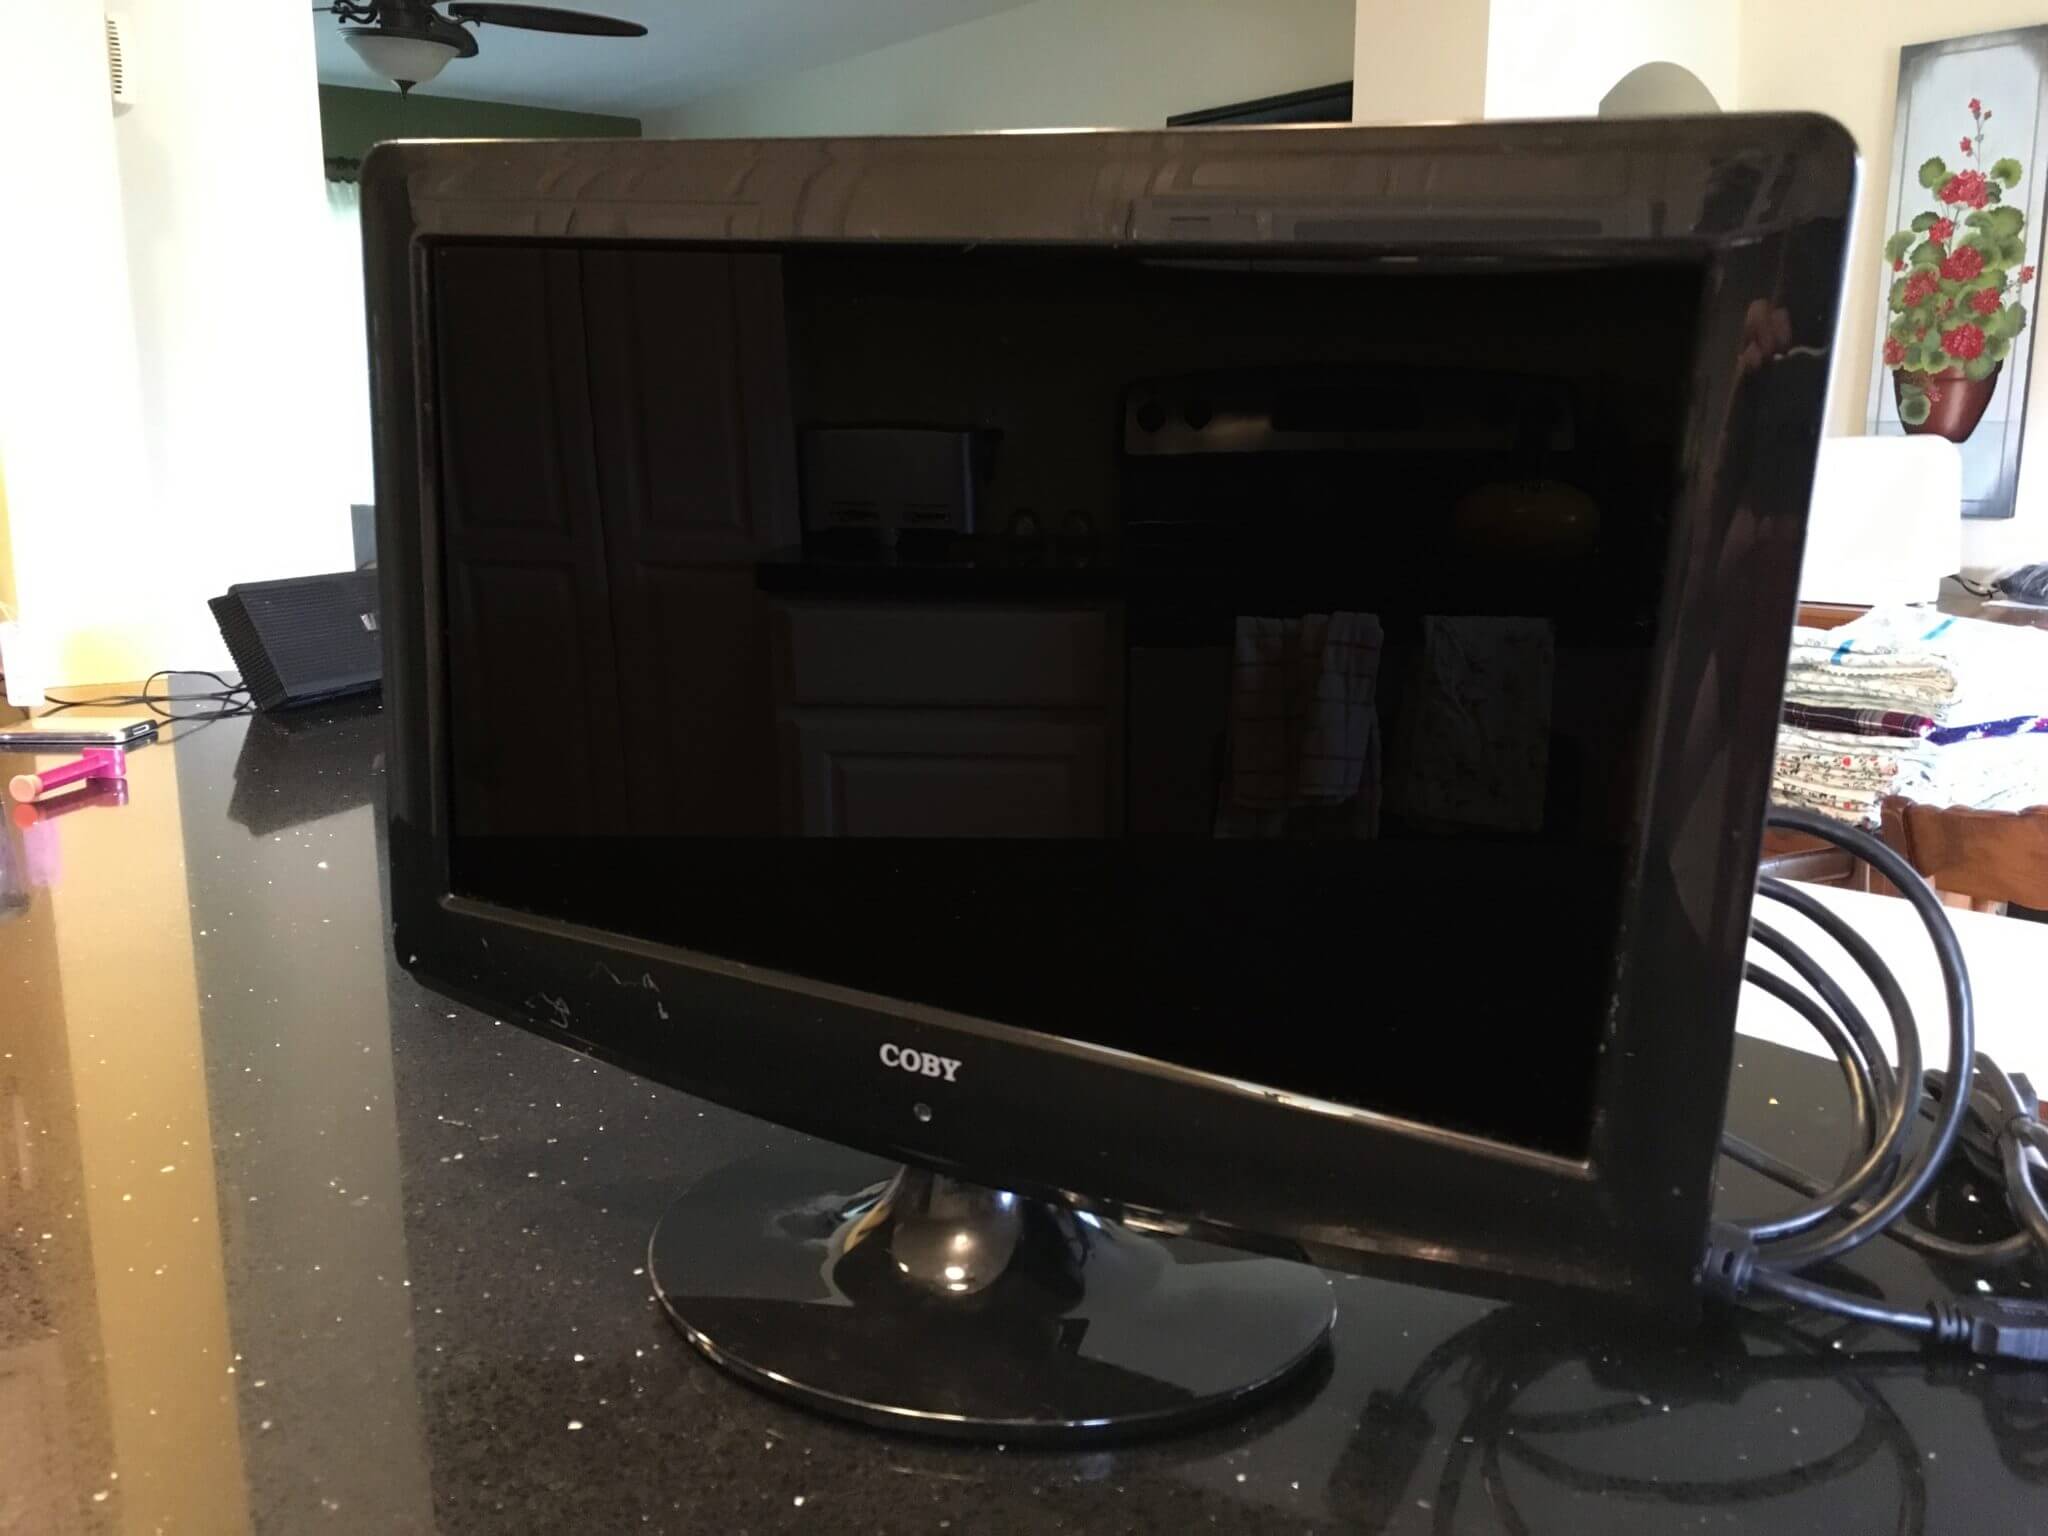 A Coby TFTV1525 15â€³ monitor/TV, purchased used, missing remote